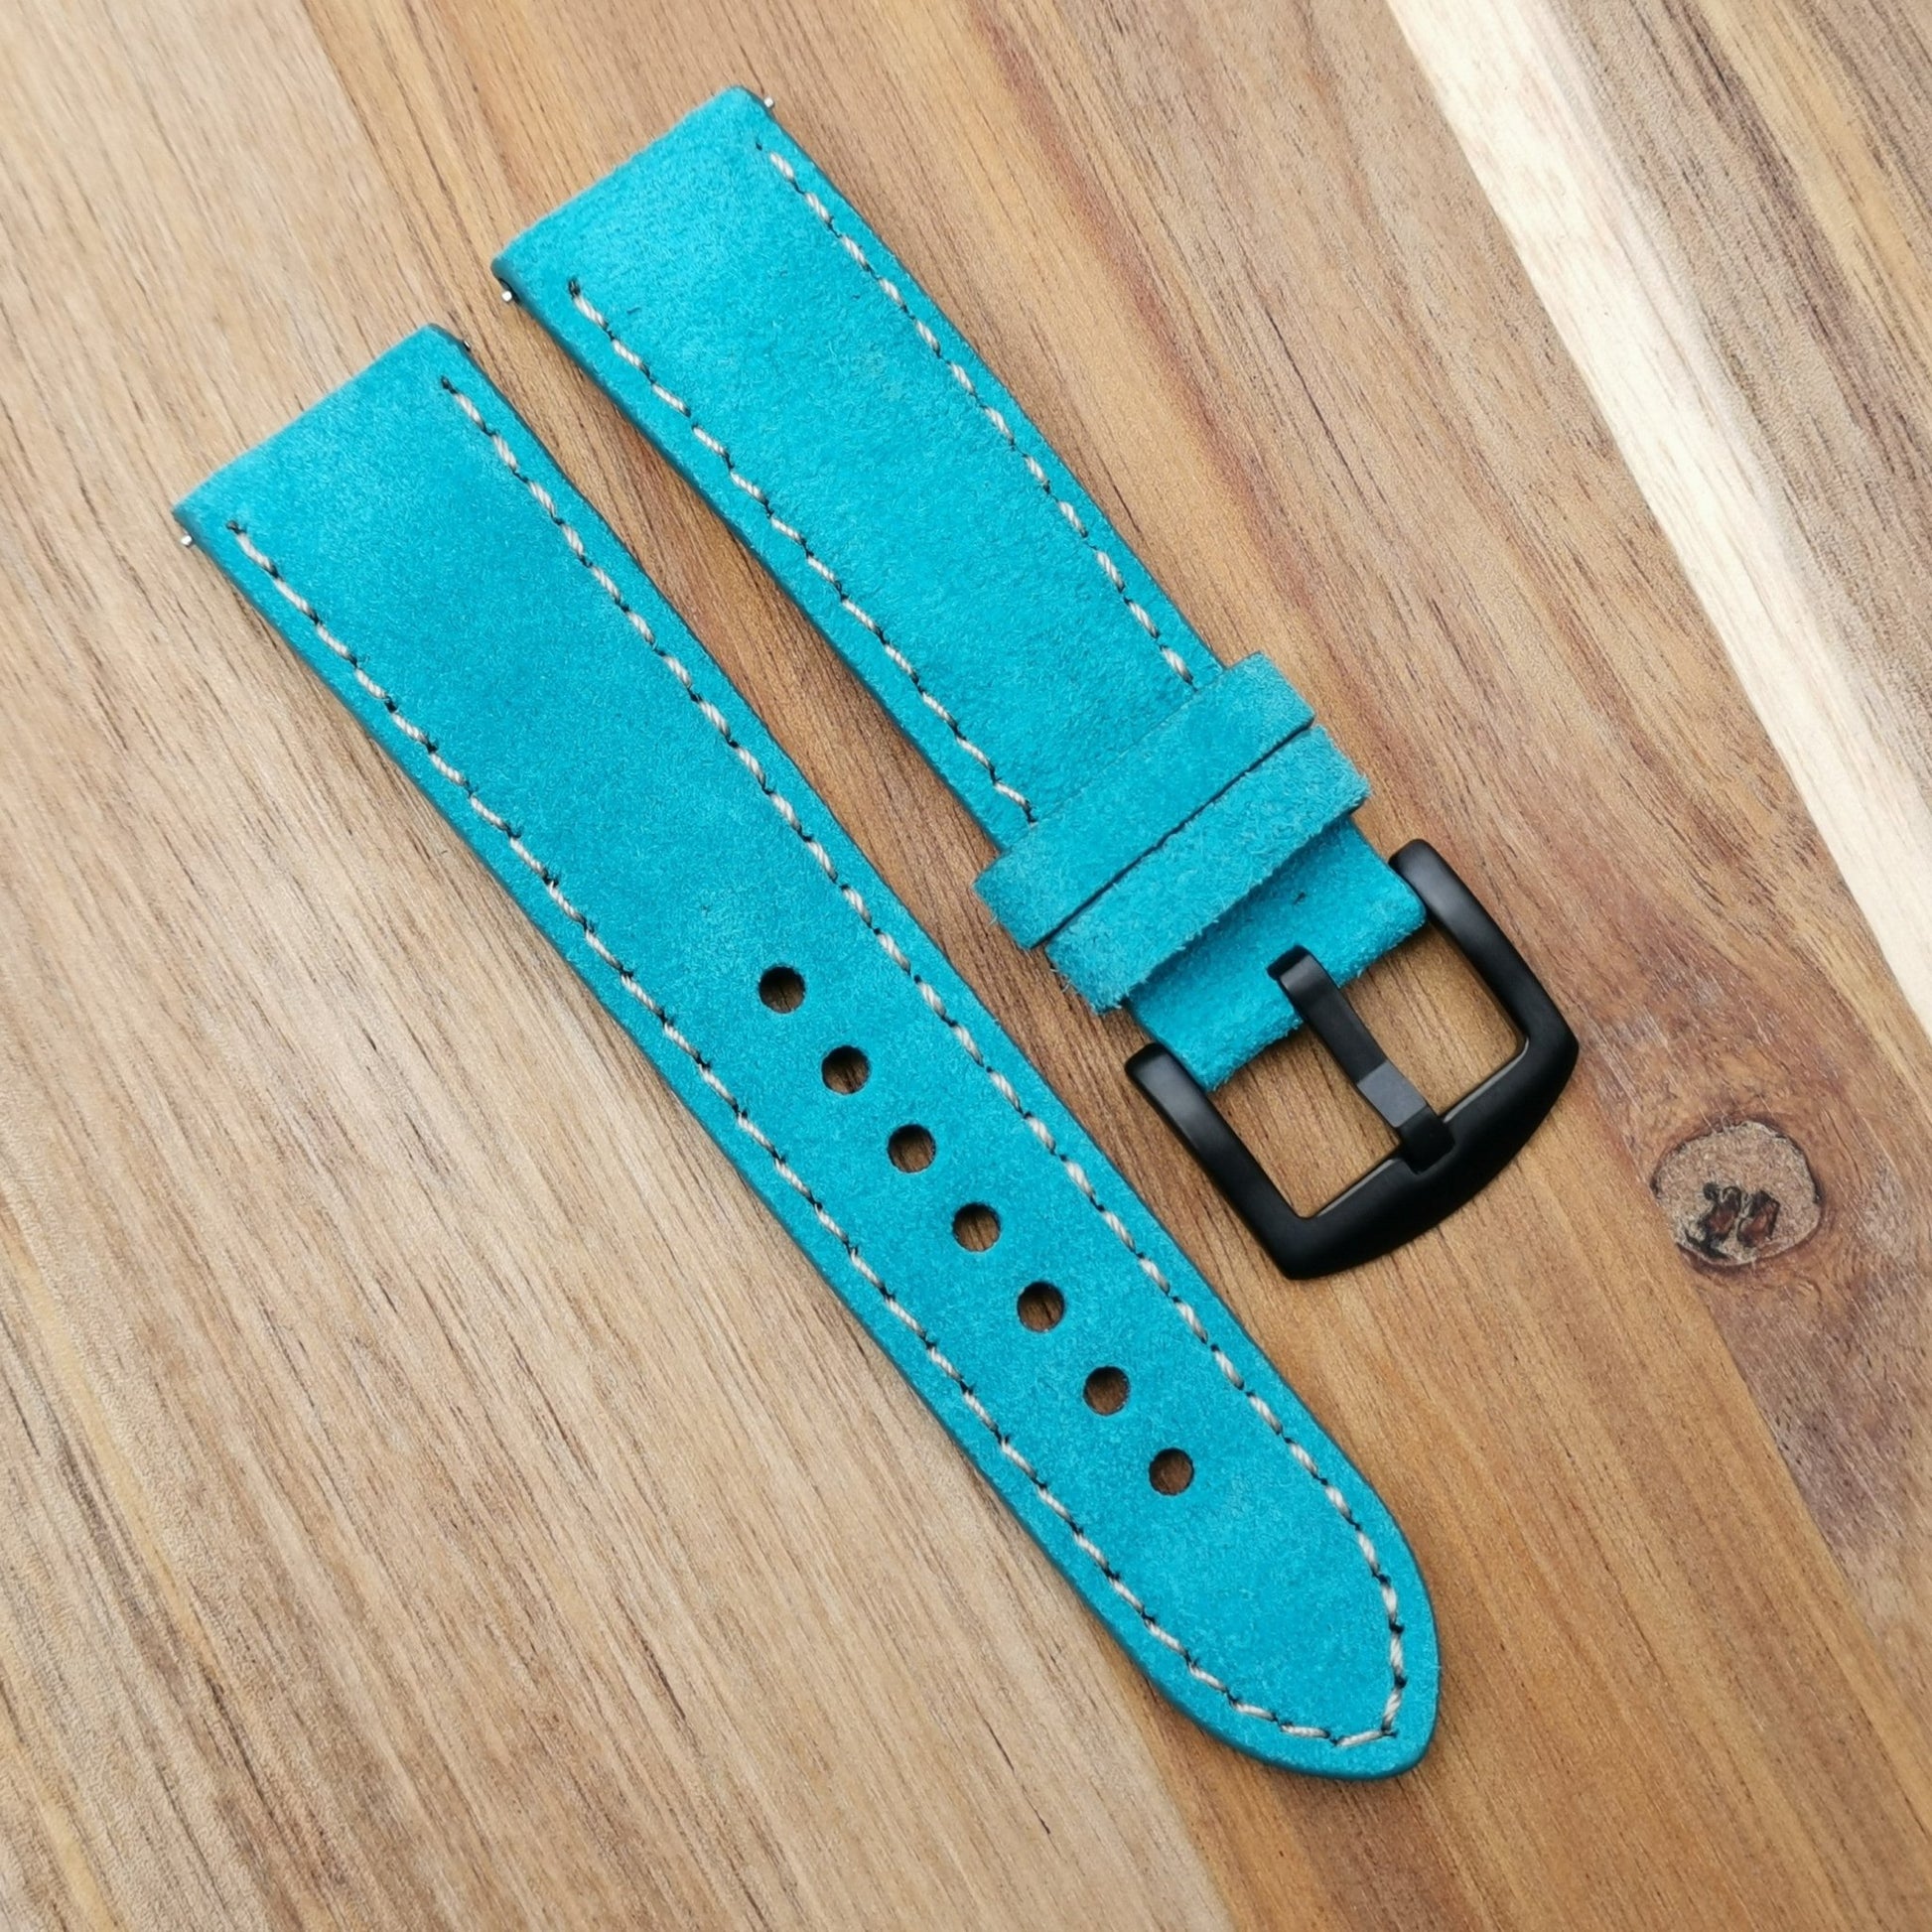 Paris turquoise suede watch strap with contrast ivory stitching. 18mm, 20mm, 22mm, 24mm. PVD black buckle. Watch And Strap.